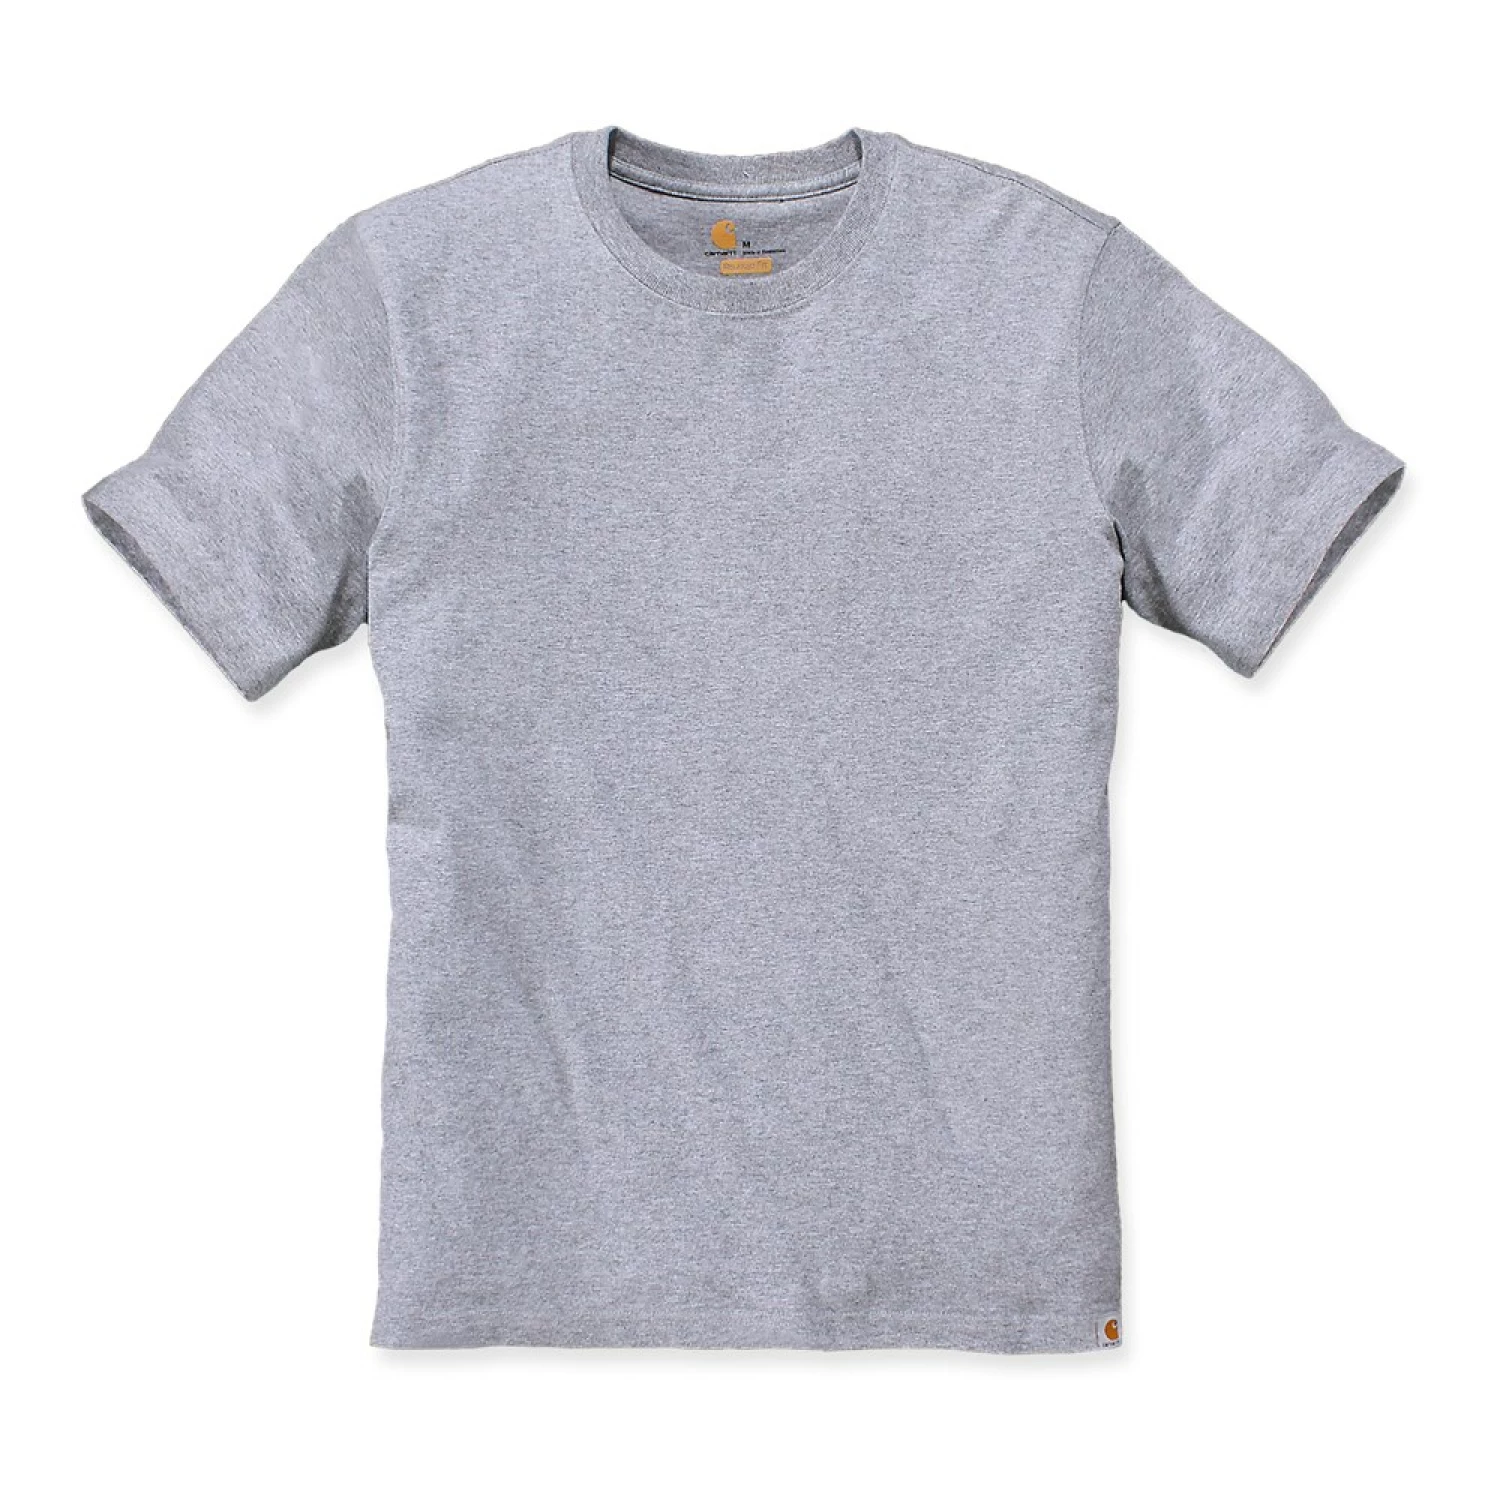 Carhartt 104264 Workwear Solid T-Shirt - Relaxed Fit - Heather Grey - XL